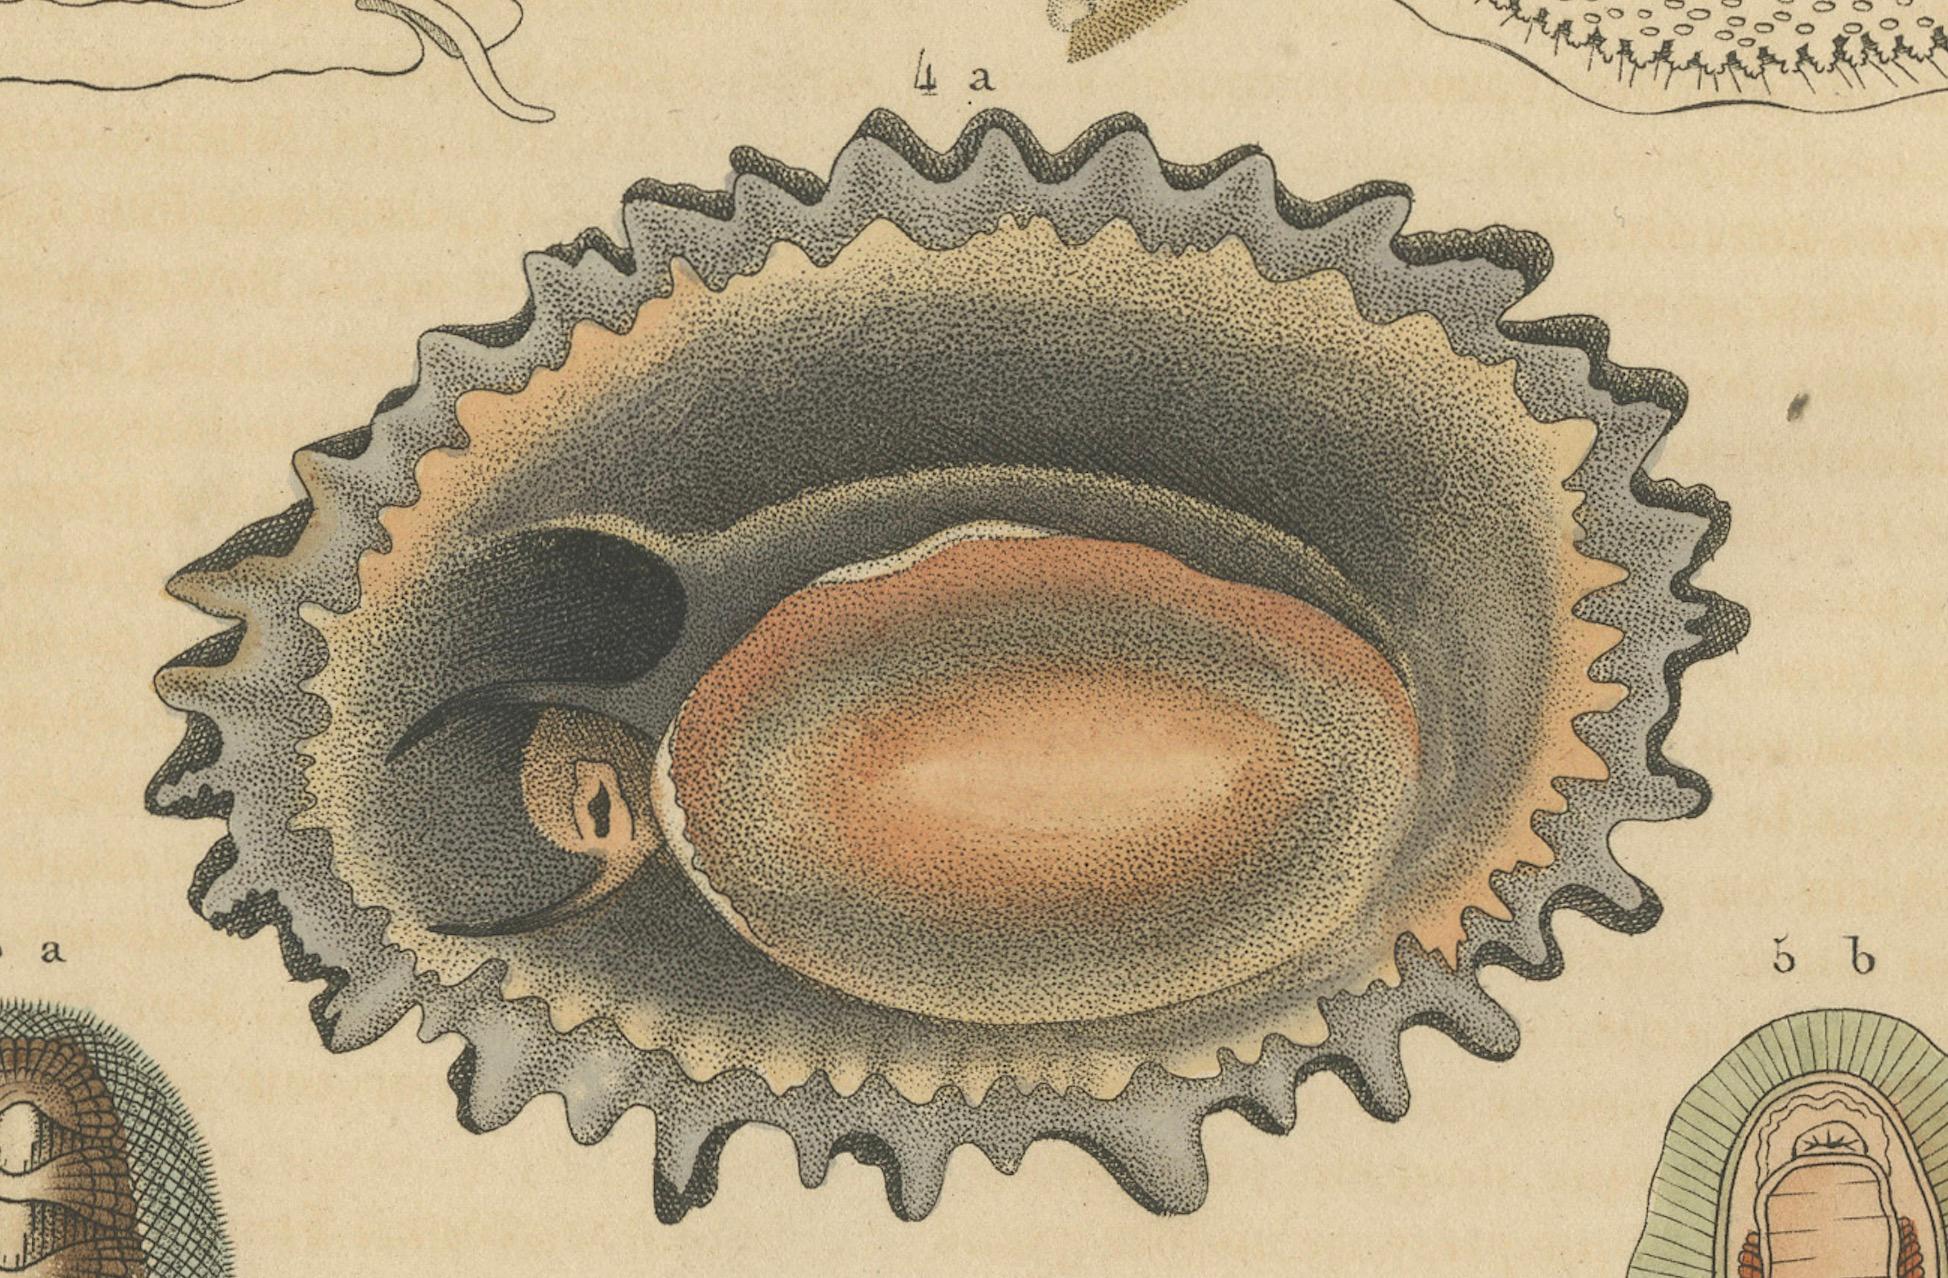 Mid-19th Century Marine Mollusk Diversity: Sponges, Abalones, Limpets, and Chitons, 1845 For Sale